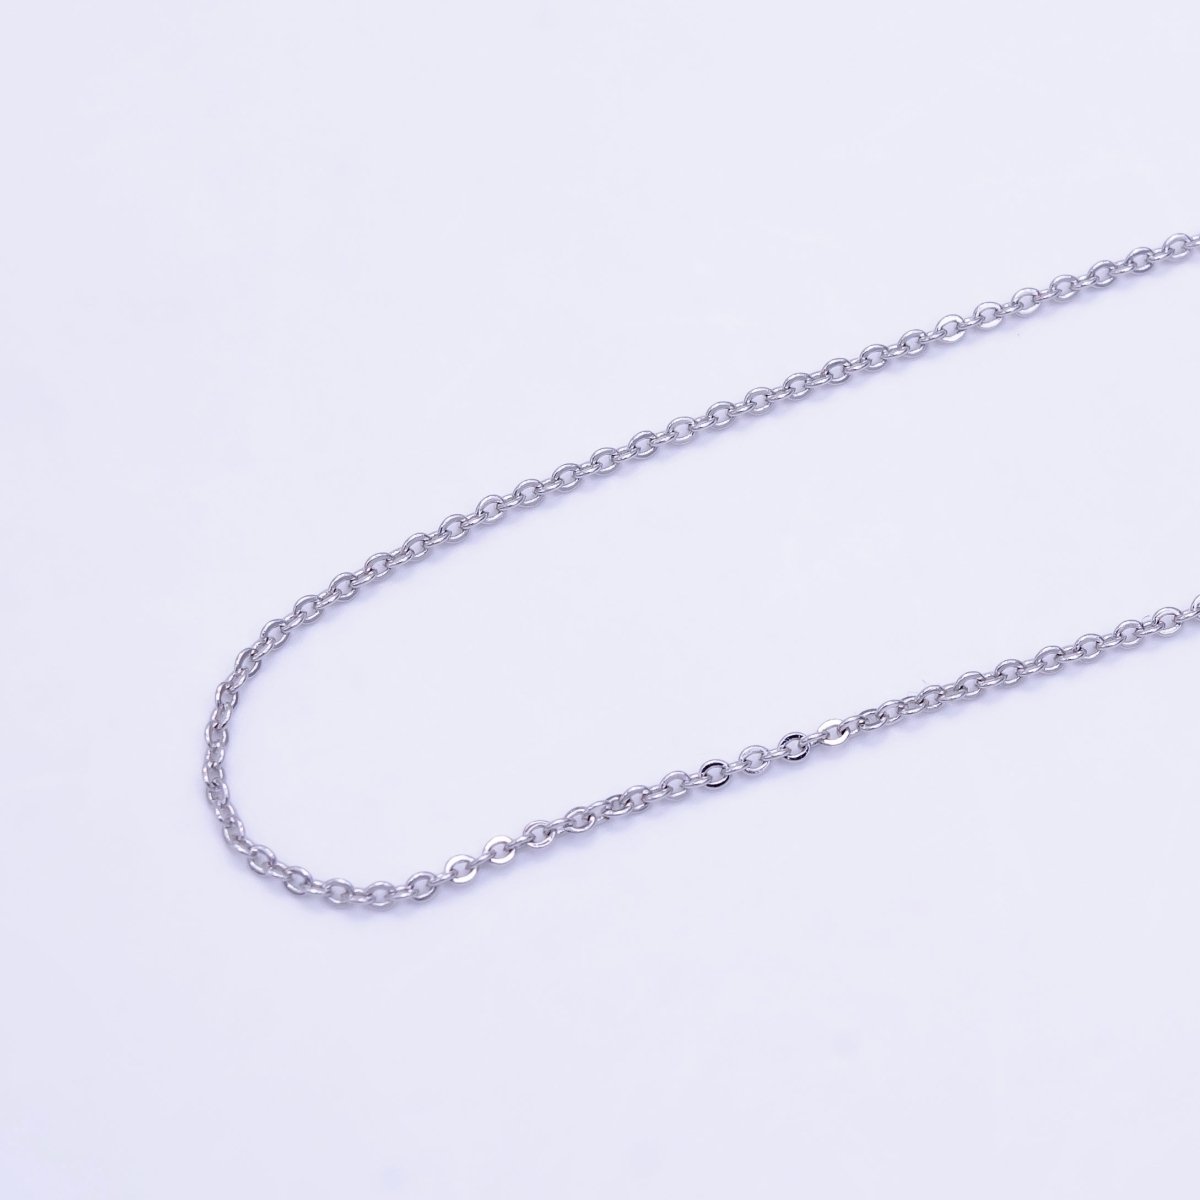 Dainty 18 inch Anchor Necklace, Minimalist Cable Chain in Silver Color, Rhodium Plated Chain For Everyday Wear | CN-635 Clearance Pricing - DLUXCA